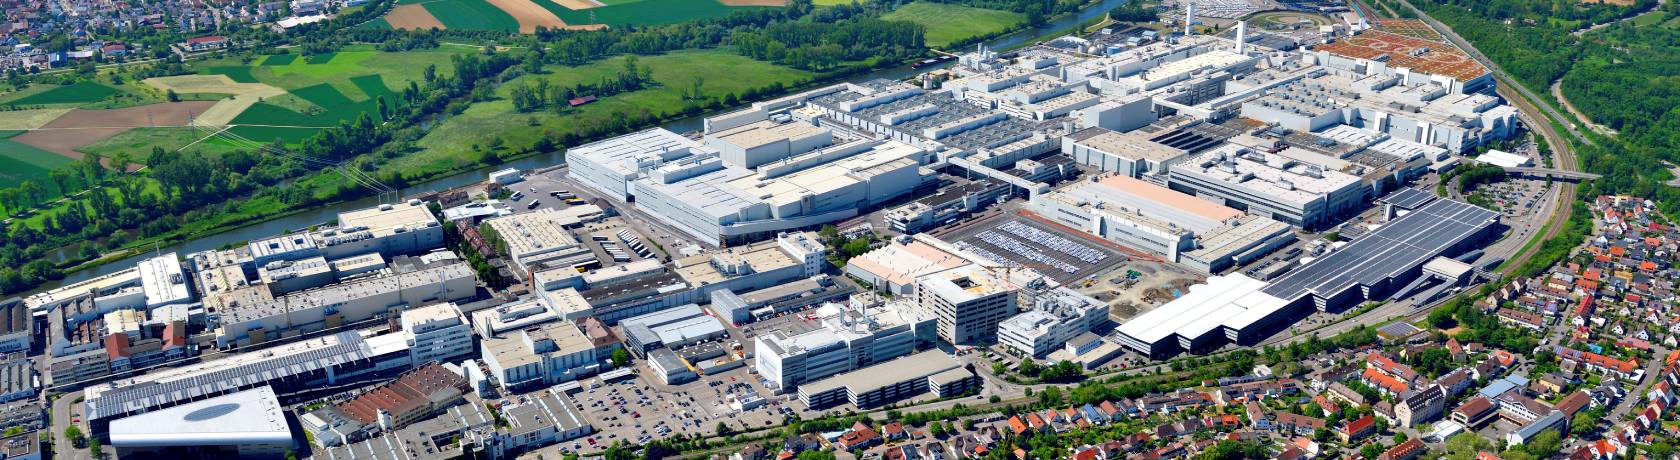 Audi, Neckarsulm will become a centre of competency for batteries in Europe